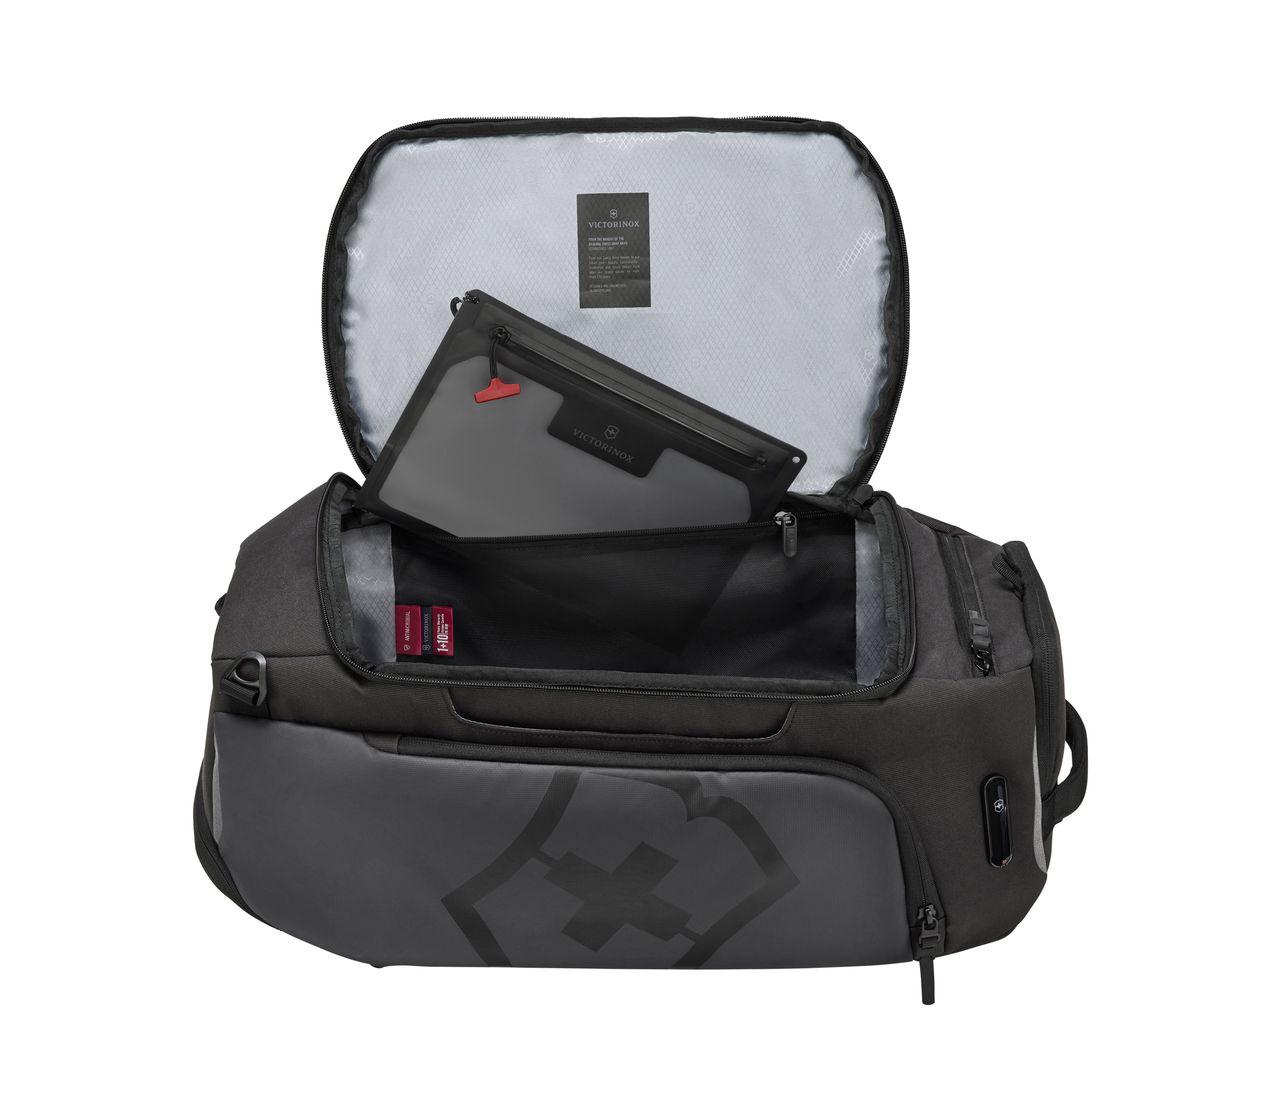 Touring 2.0 Travel 2in1 Duffel-612124